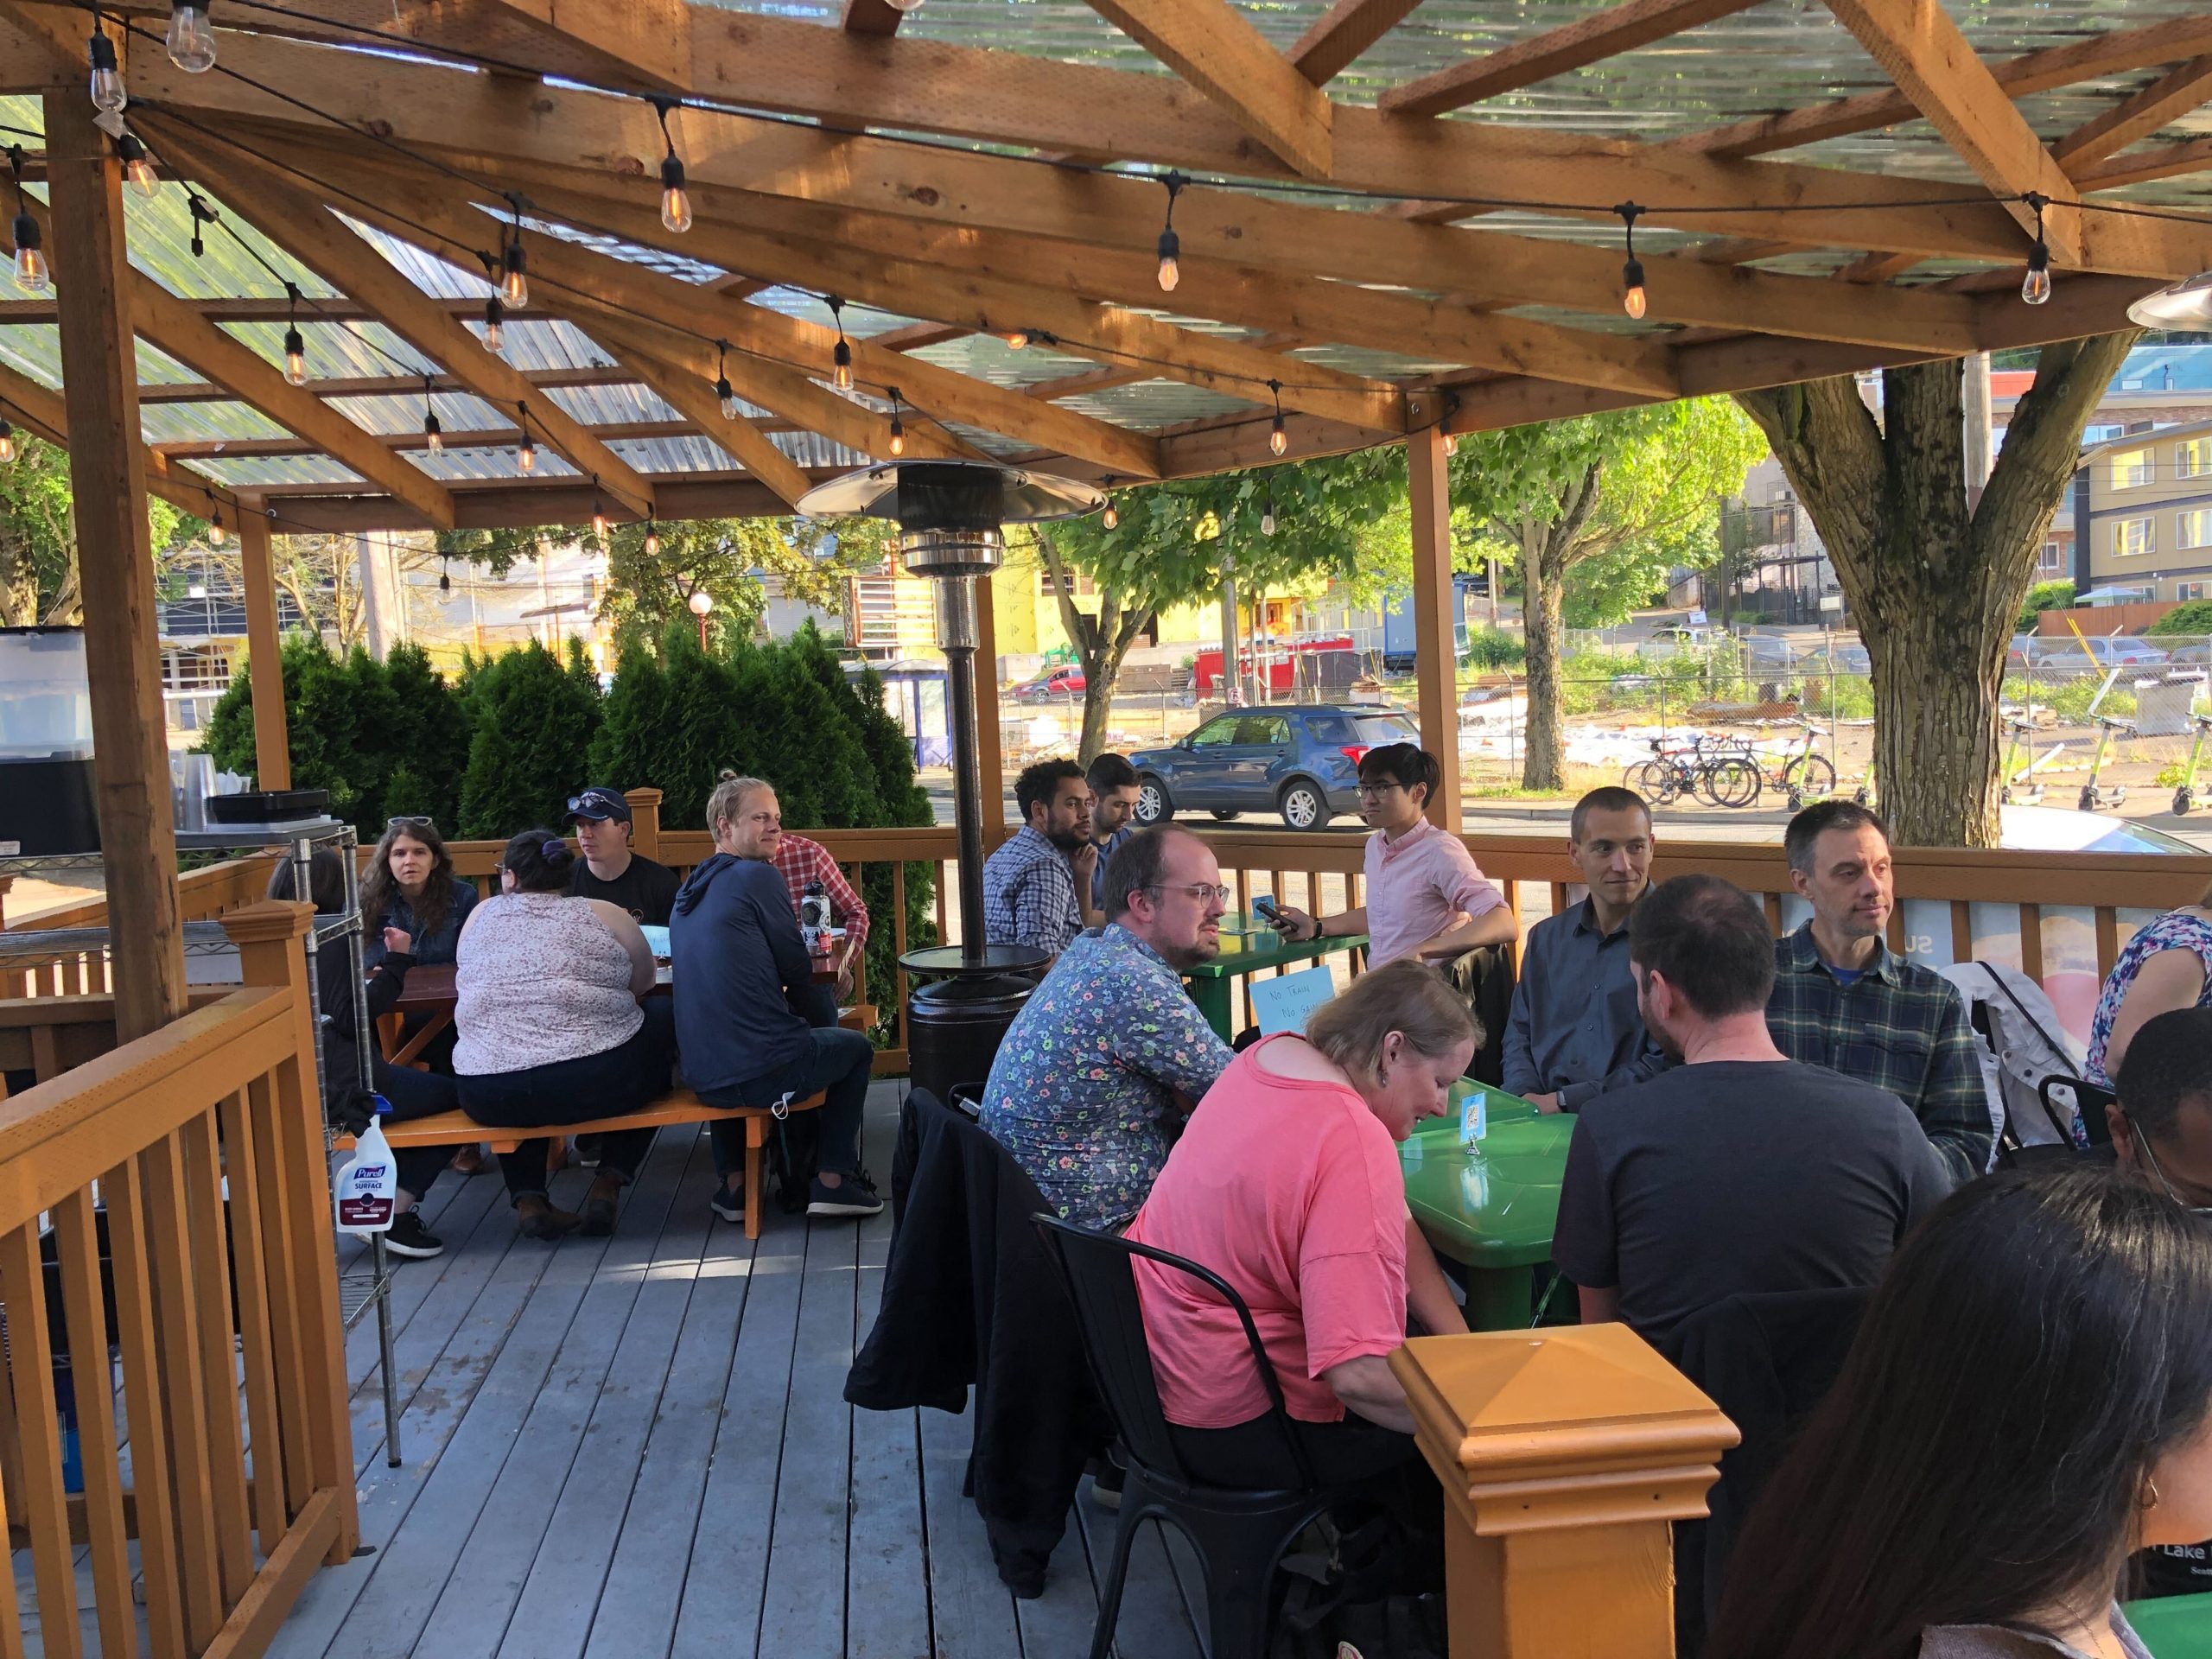 Transit Trivia participants sitting on an outdoor patio